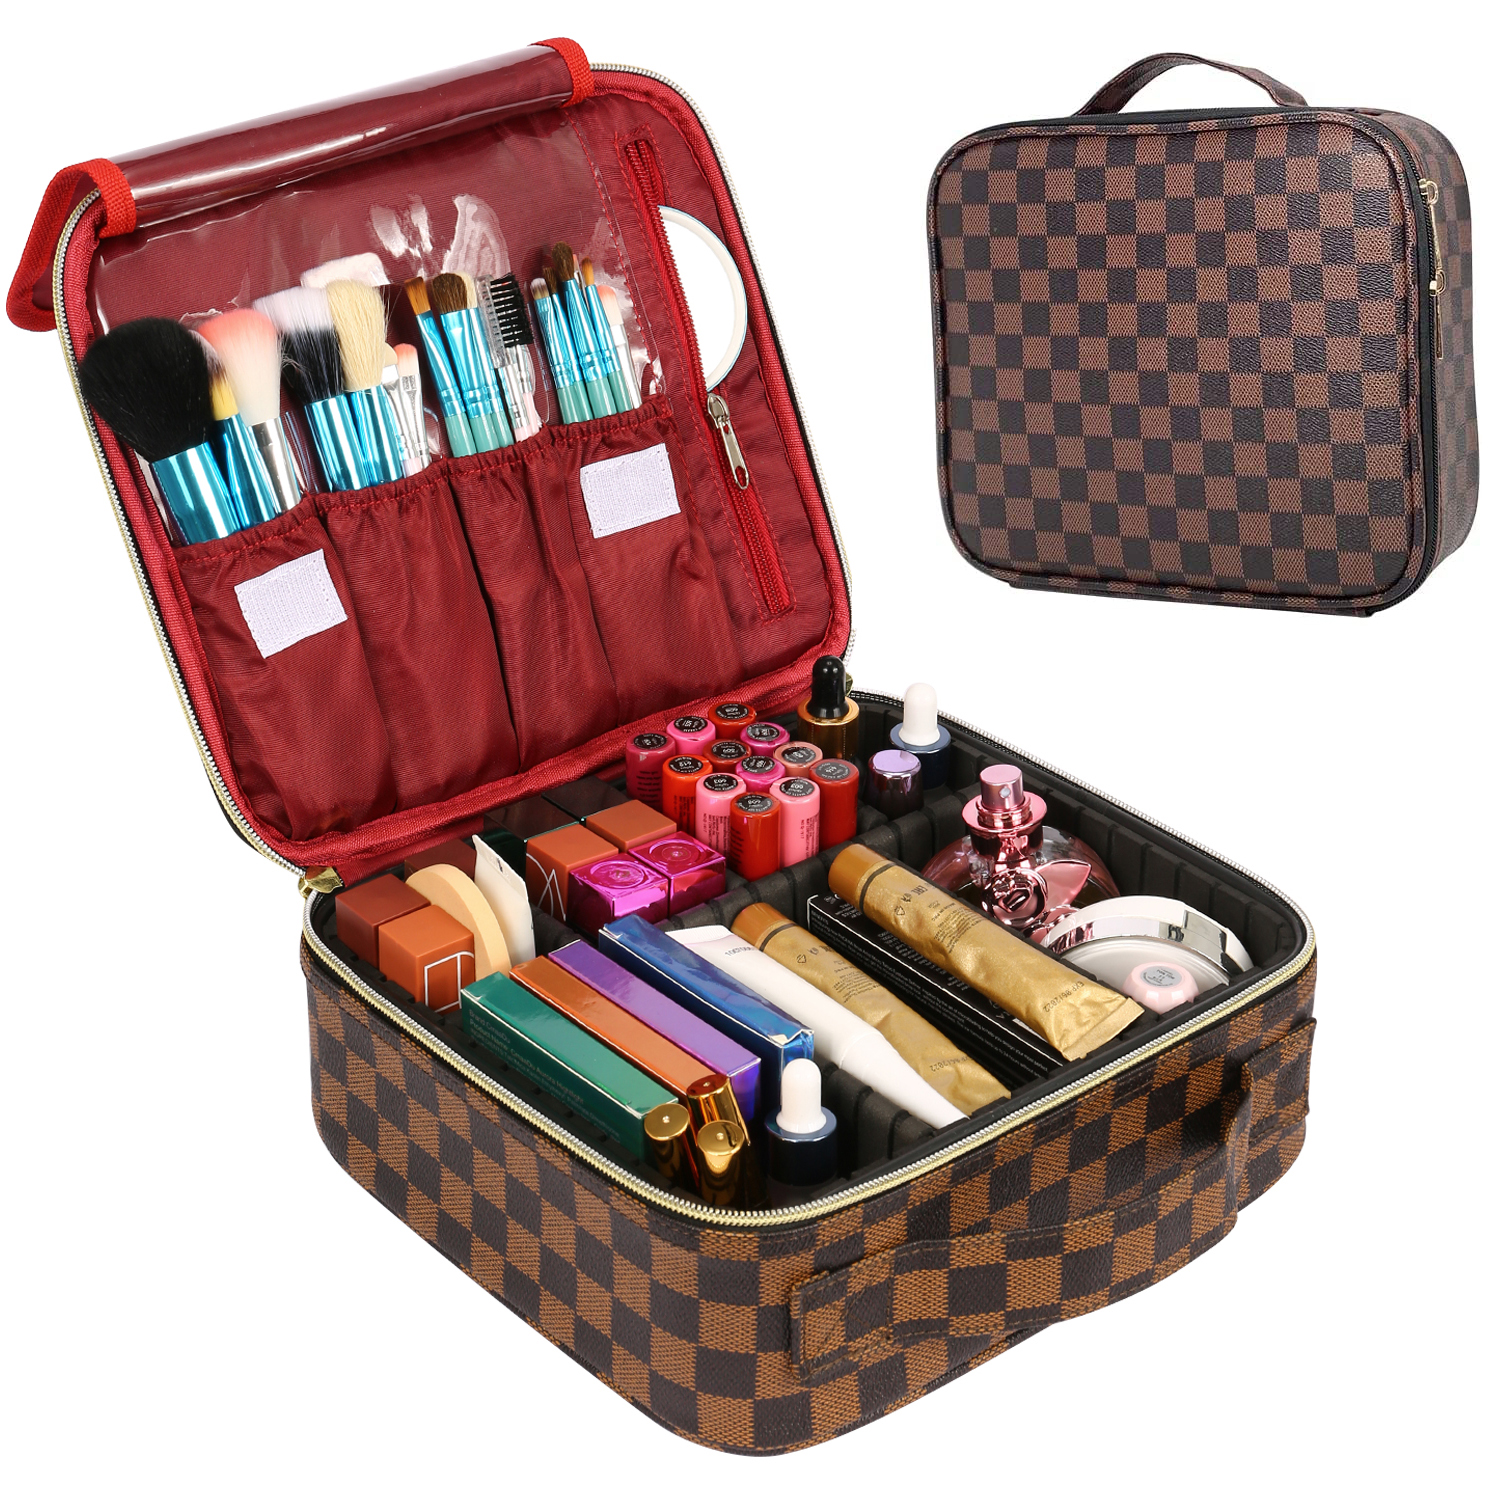 Aokur Water-resistant Makeup Cosmetic Bag Travel Organizer with Adjustable Dividers $24.91 + Free Shipping w/ Wlmart Prime or Orders $35+